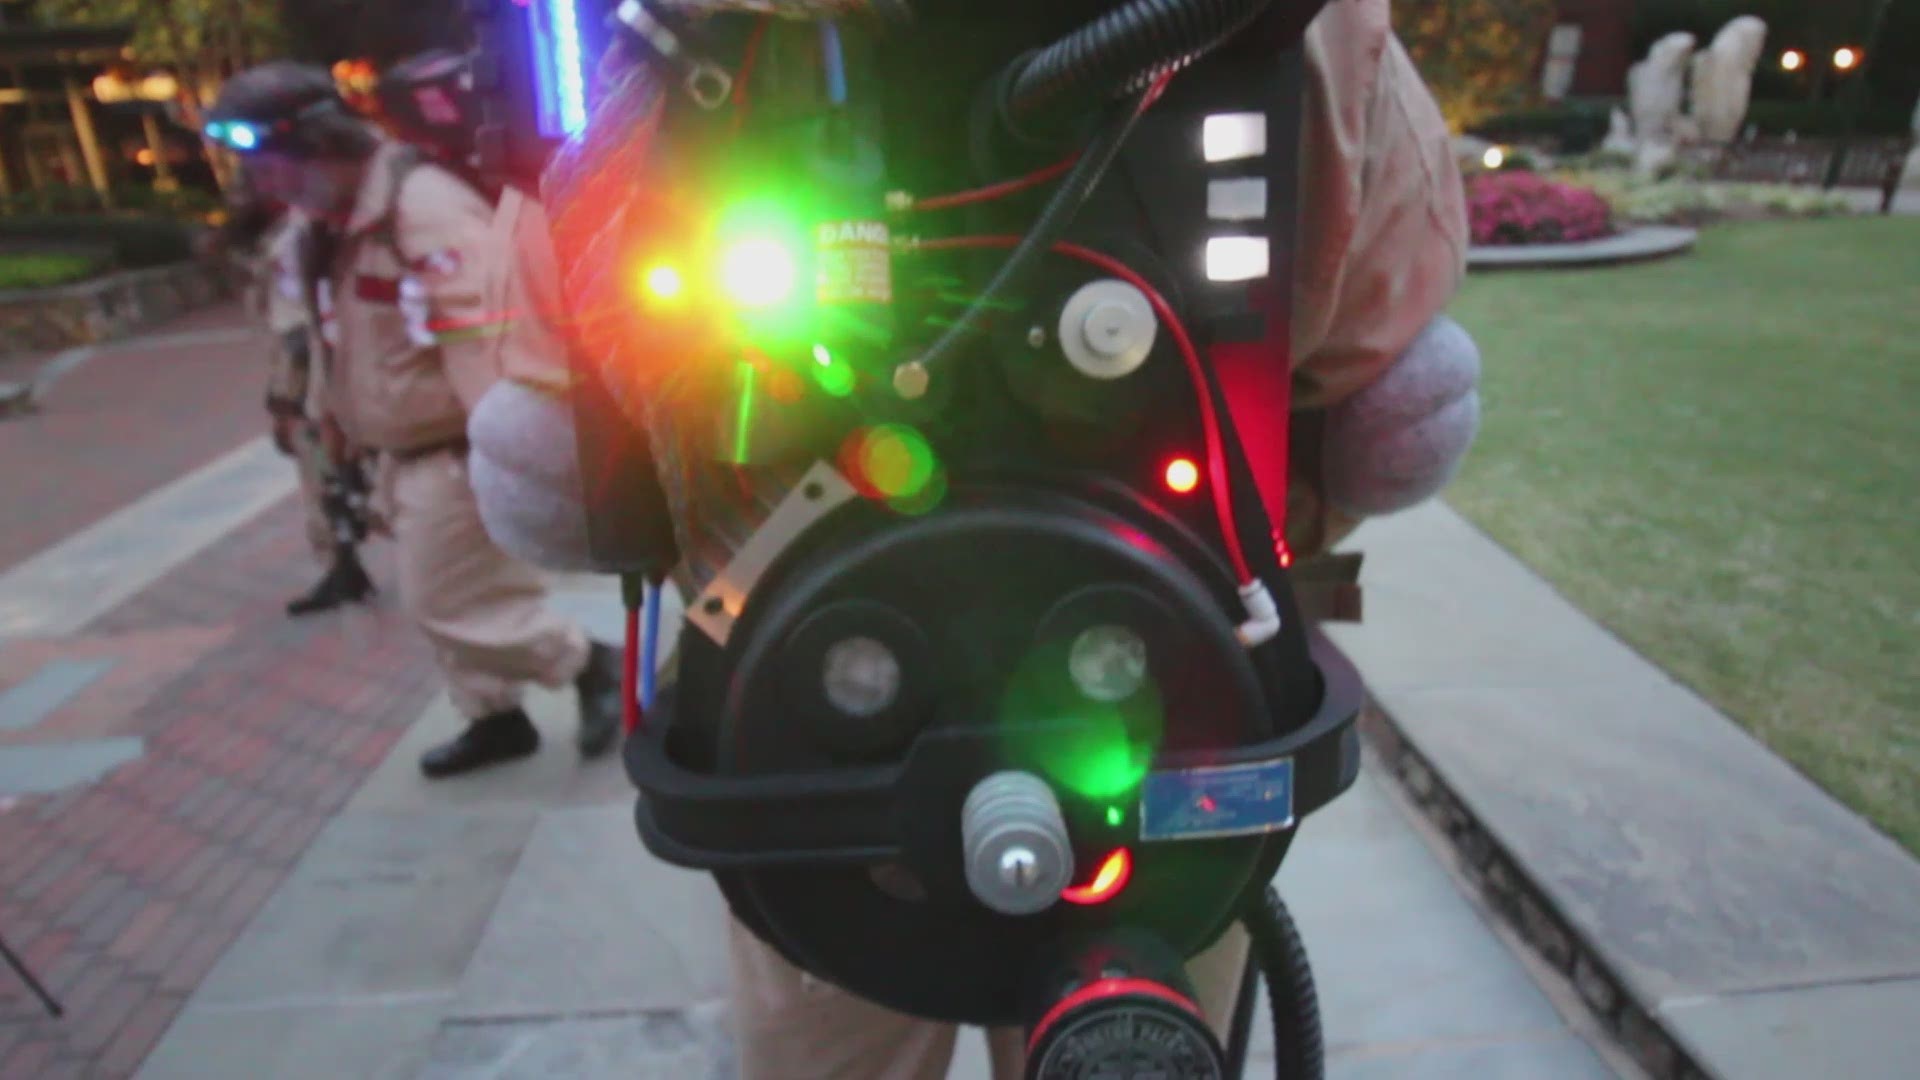 With proton packs, uniforms and pulling up in an Ecto-1, the Ghostbusters of North Carolina are the real deal. And the folks that call upon them are really in need of their skill.